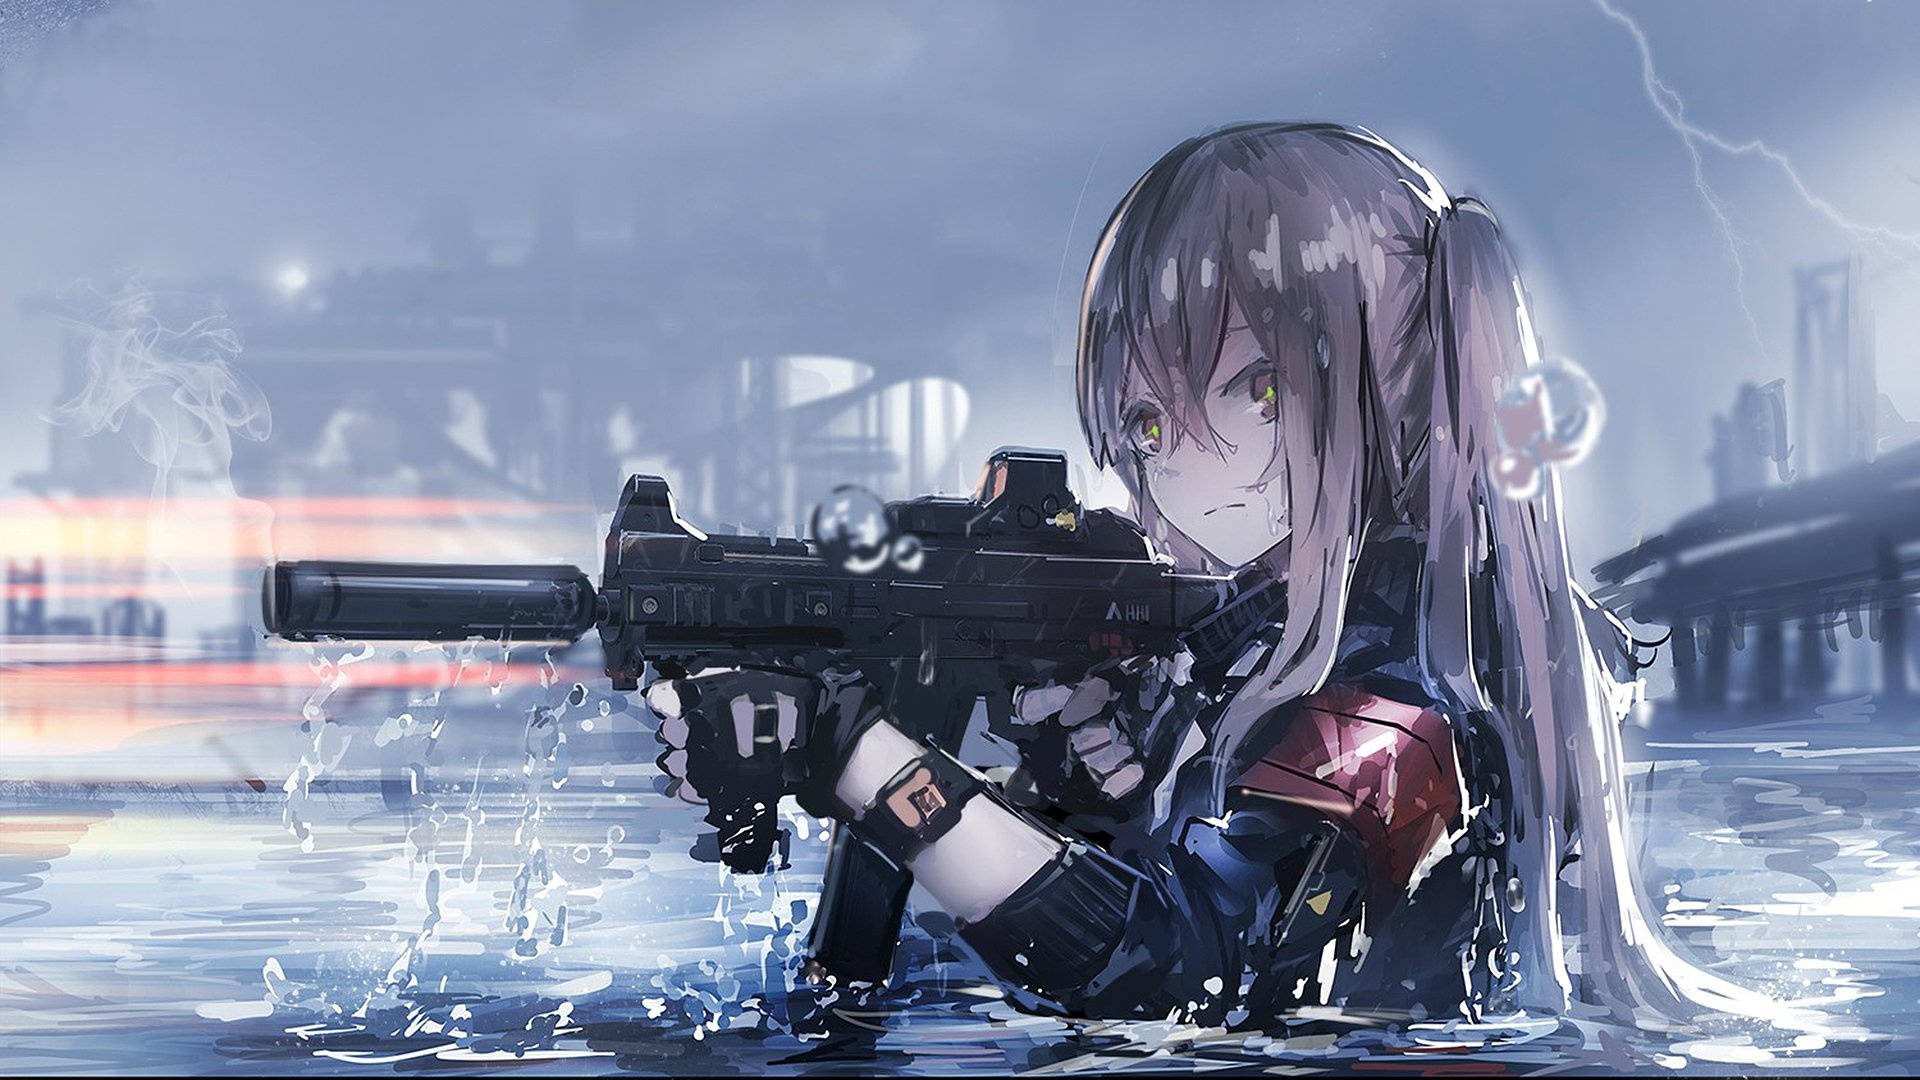 Girls' Frontline Anime, HD wallpapers, Stylish designs, Collection of images, 1920x1080 Full HD Desktop